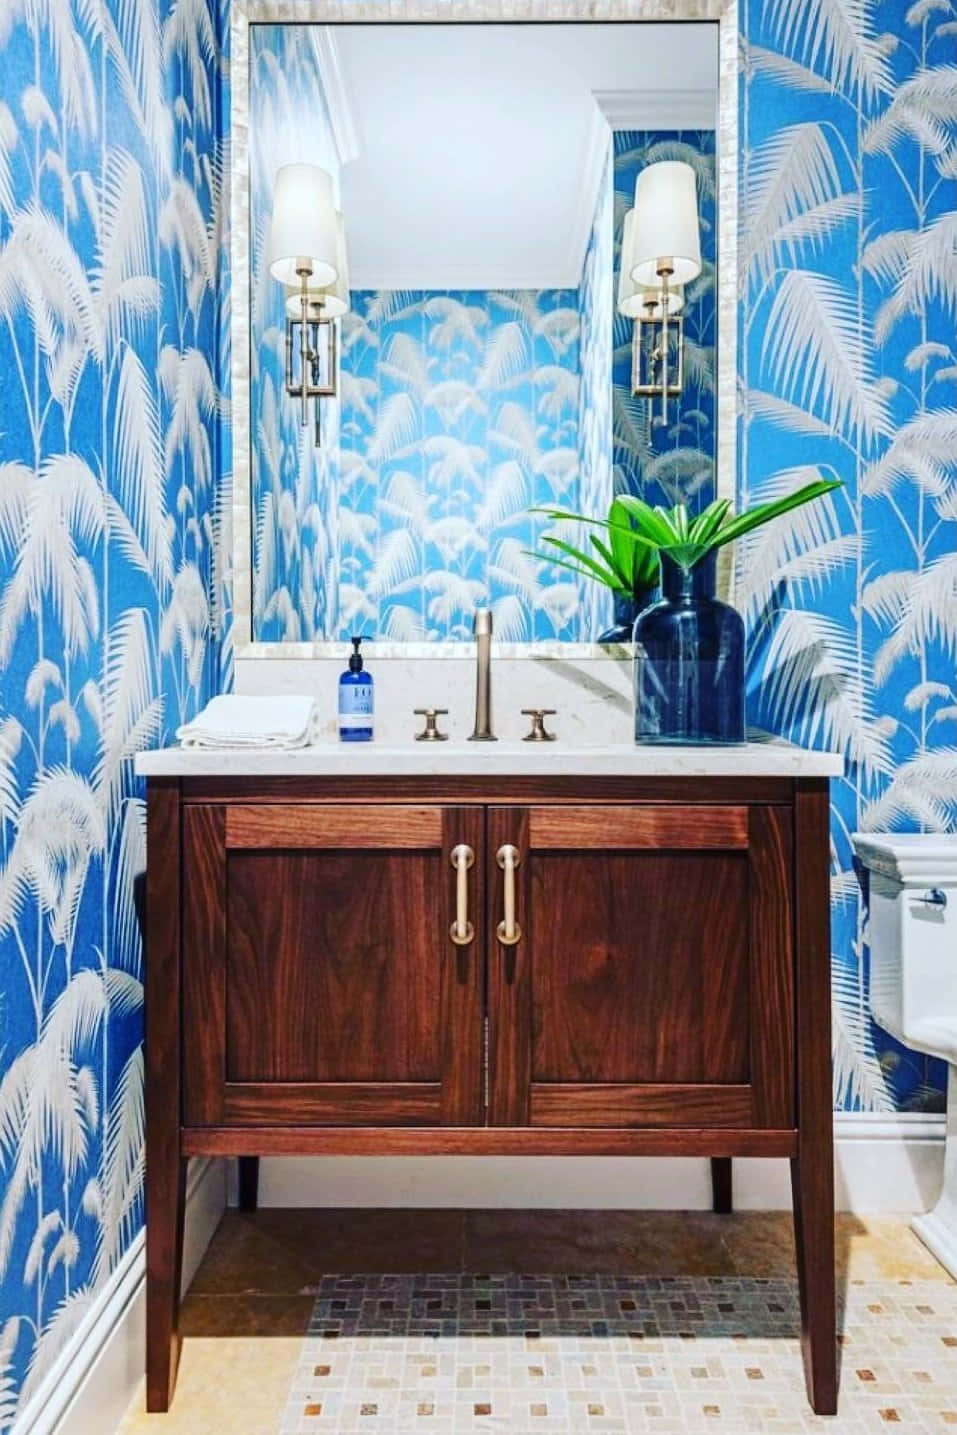 A Sumptuous Blue And White Bathroom With Feather Patterned Wall Background